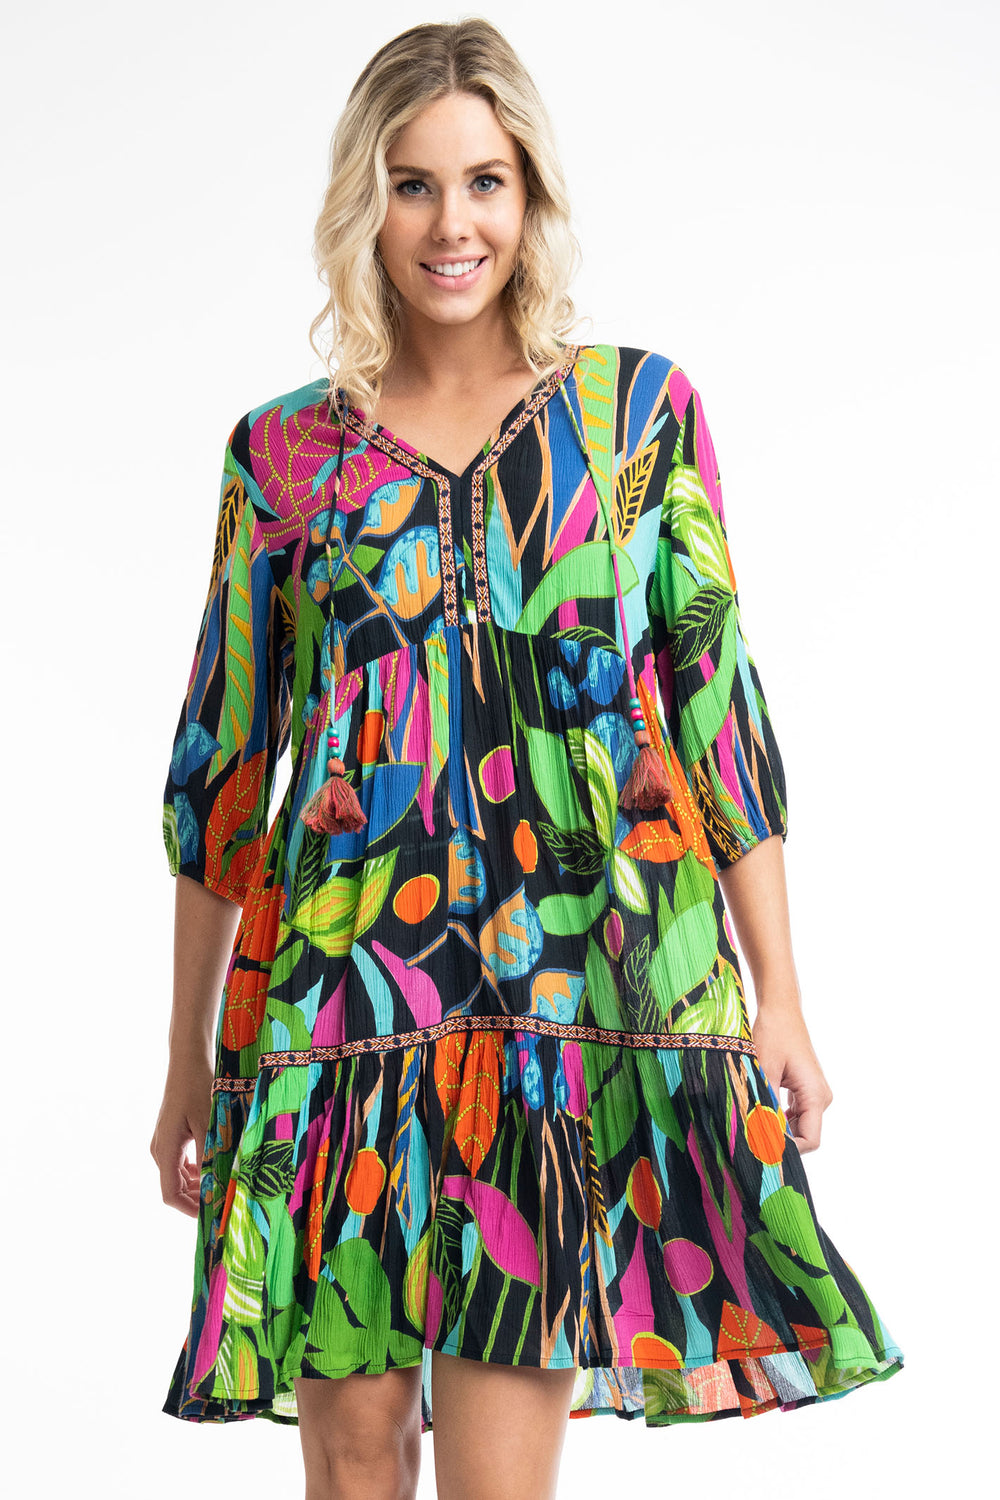 Orientique O9179 Nicossia Black Tropical Print Embellished Dress - Experience Boutique